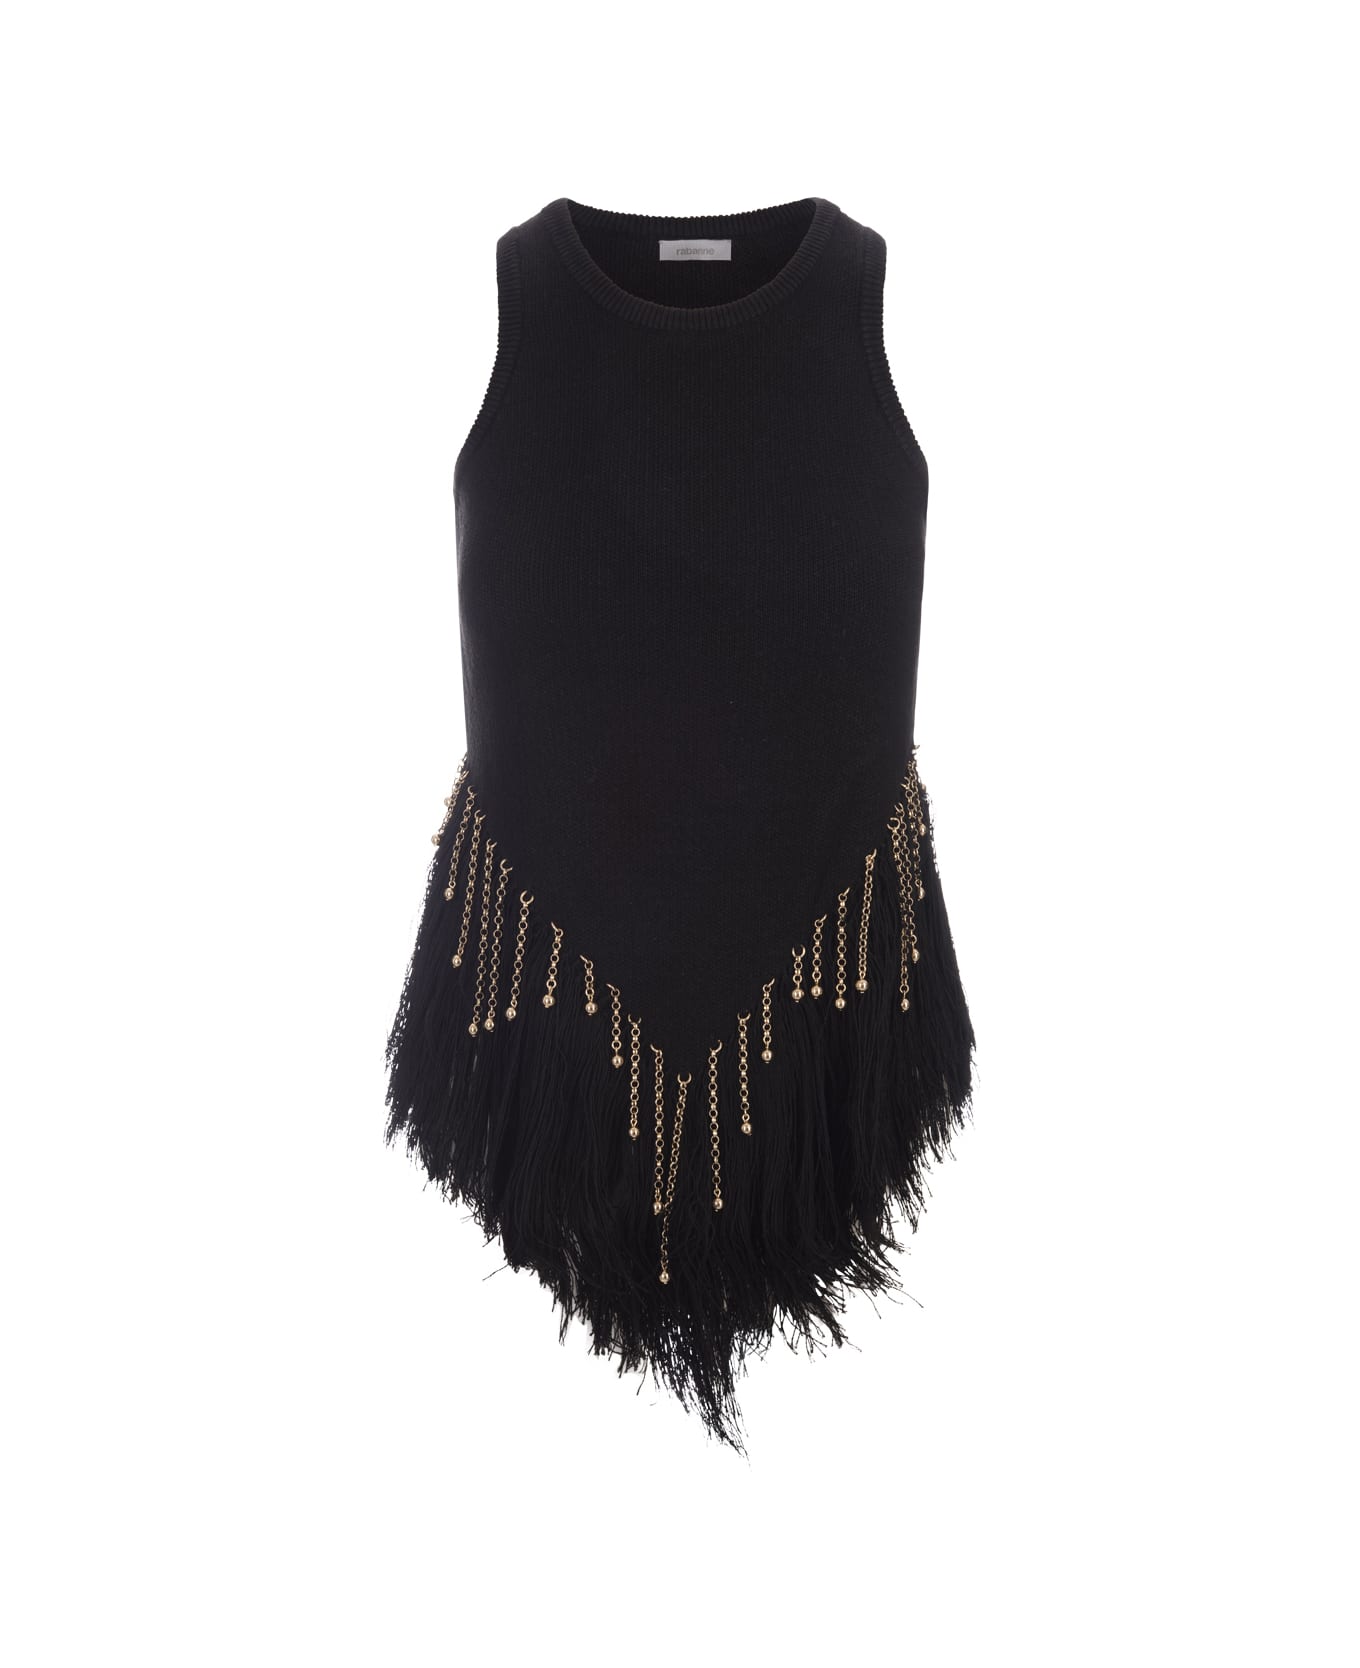 Paco Rabanne Black Woven Top With Knitted Beads And Feathers - Black